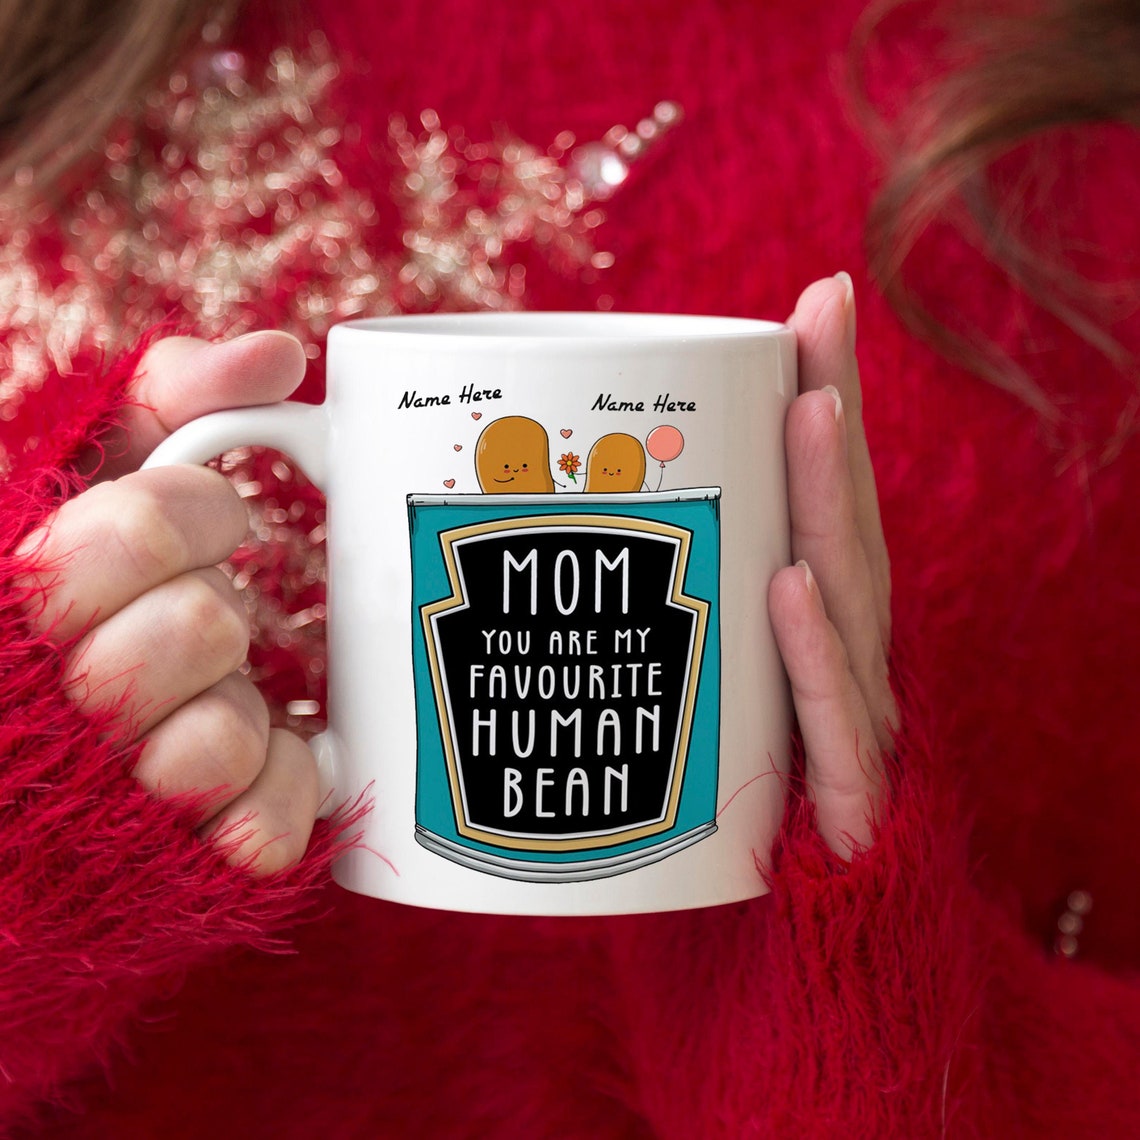 You're My Favourite Human Bean - Personalized Custom Mother's Day Mug